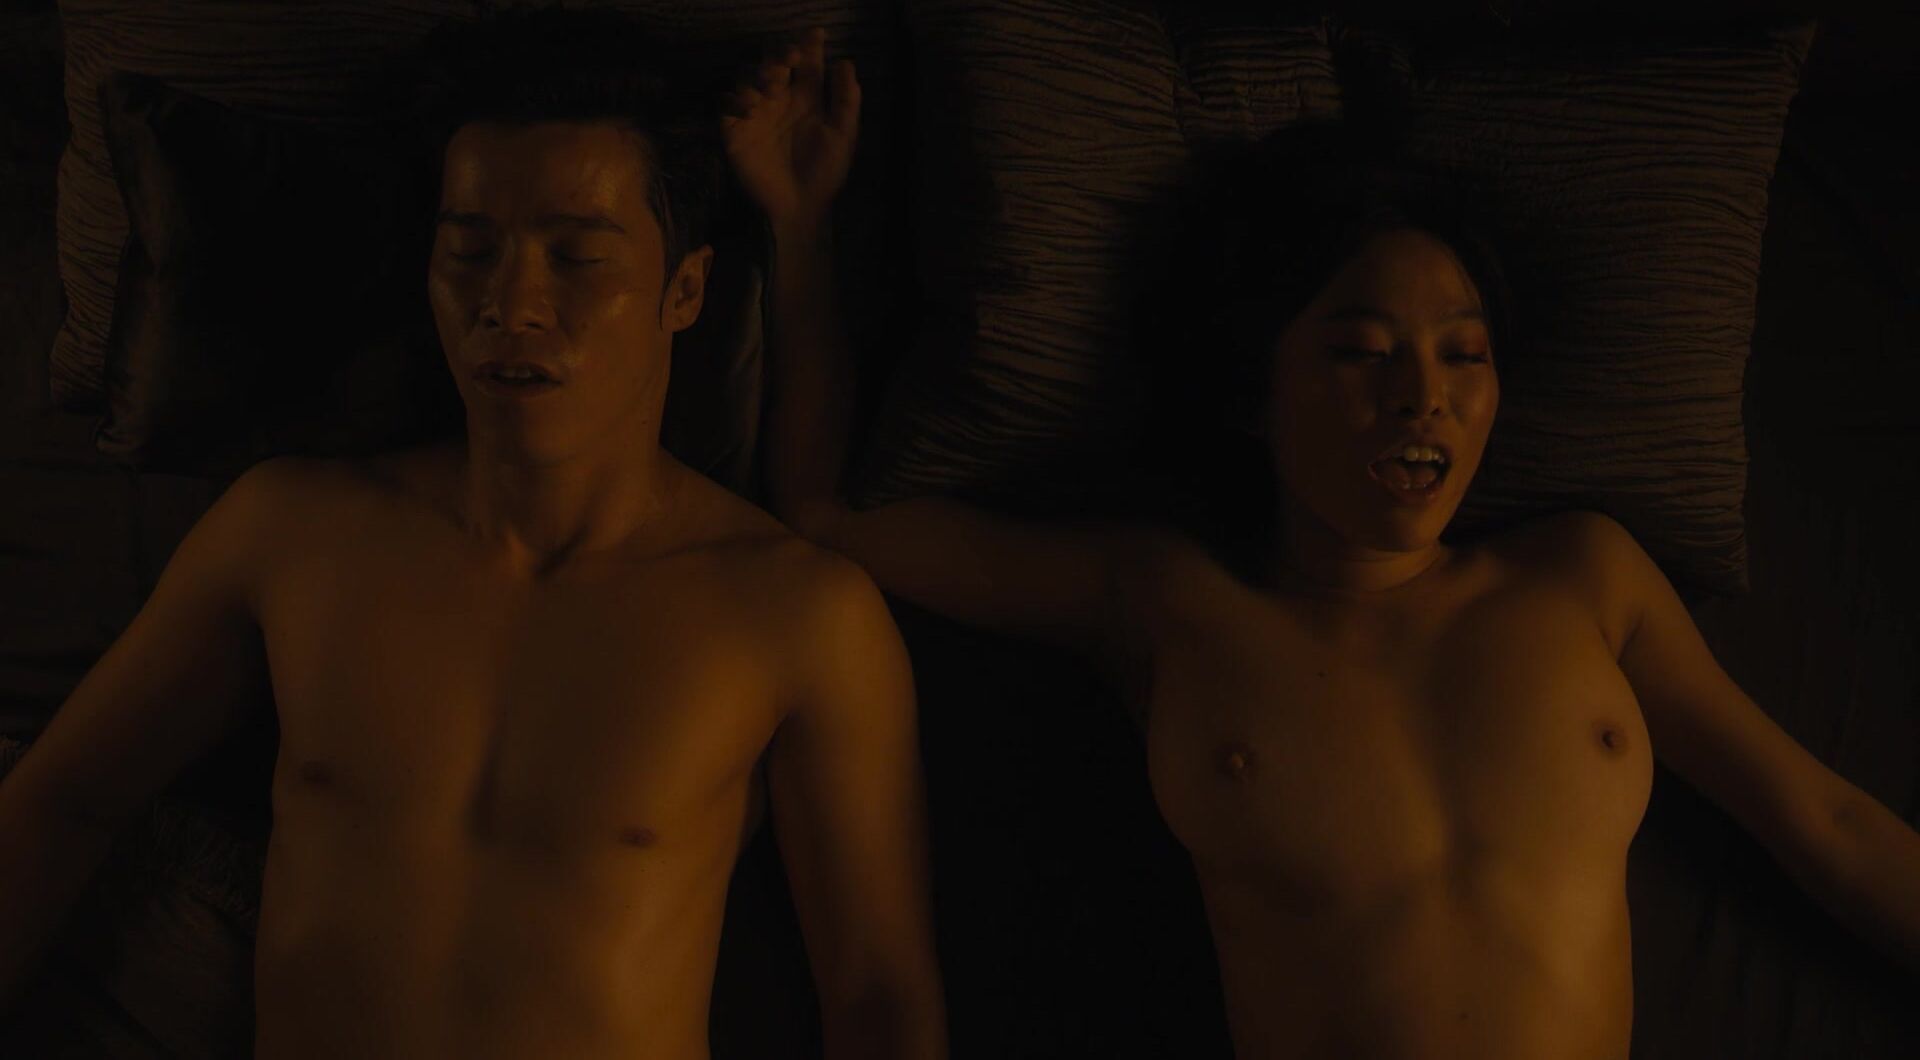 Fake Tits Hanni Choi is sexy to look at in Warrior s01e07 (2019) NoveltyExpo